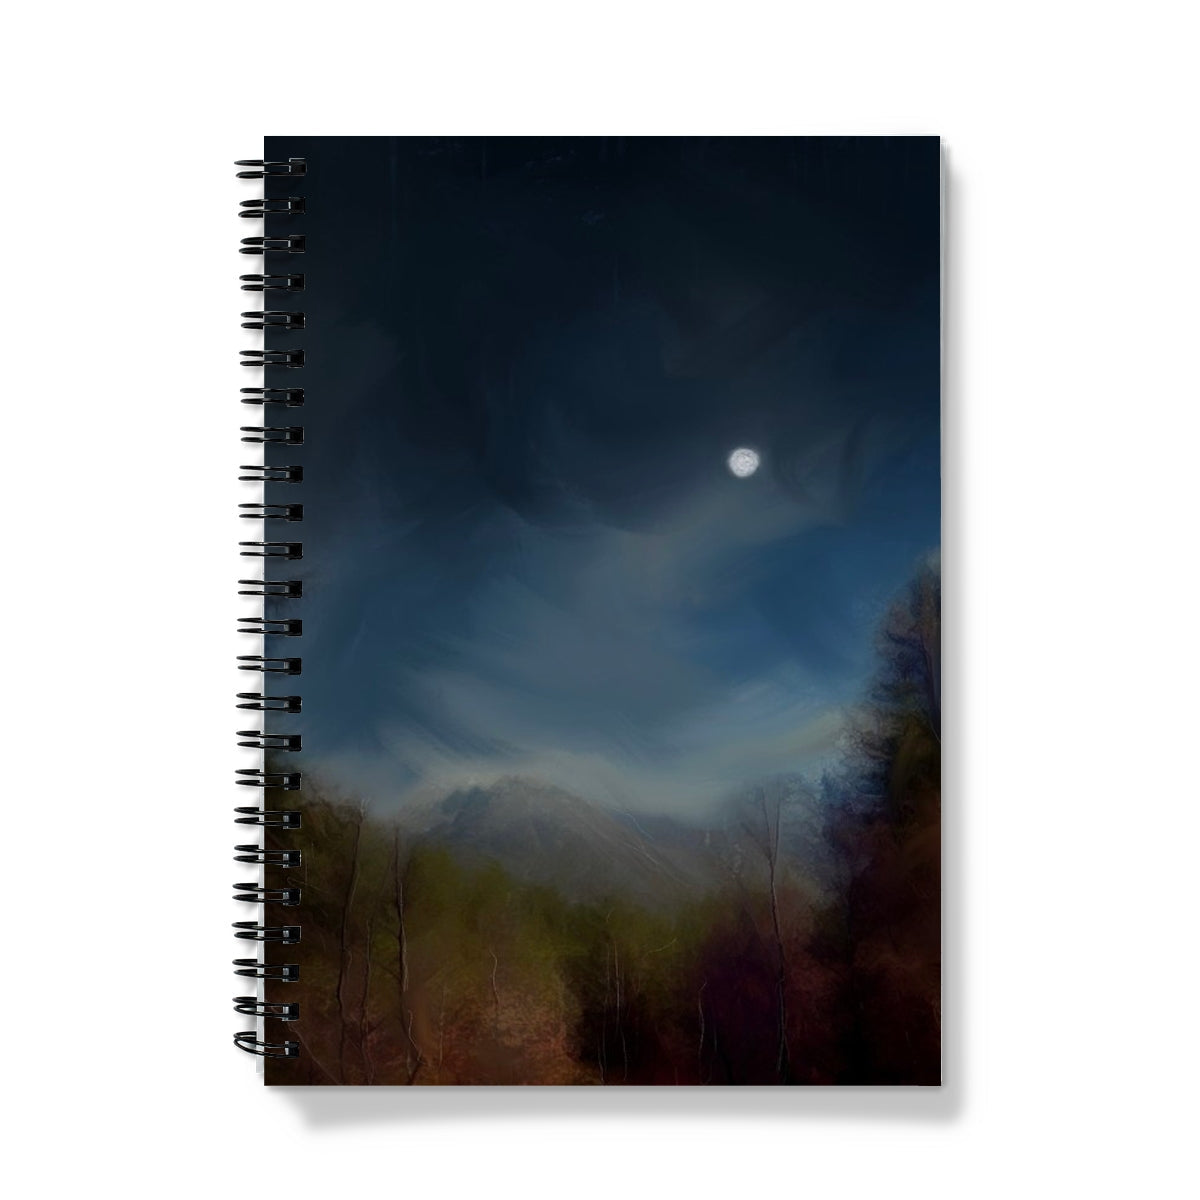 Glencoe Lochan Moonlight Art Gifts Notebook-Journals & Notebooks-Scottish Lochs & Mountains Art Gallery-A5-Lined-Paintings, Prints, Homeware, Art Gifts From Scotland By Scottish Artist Kevin Hunter